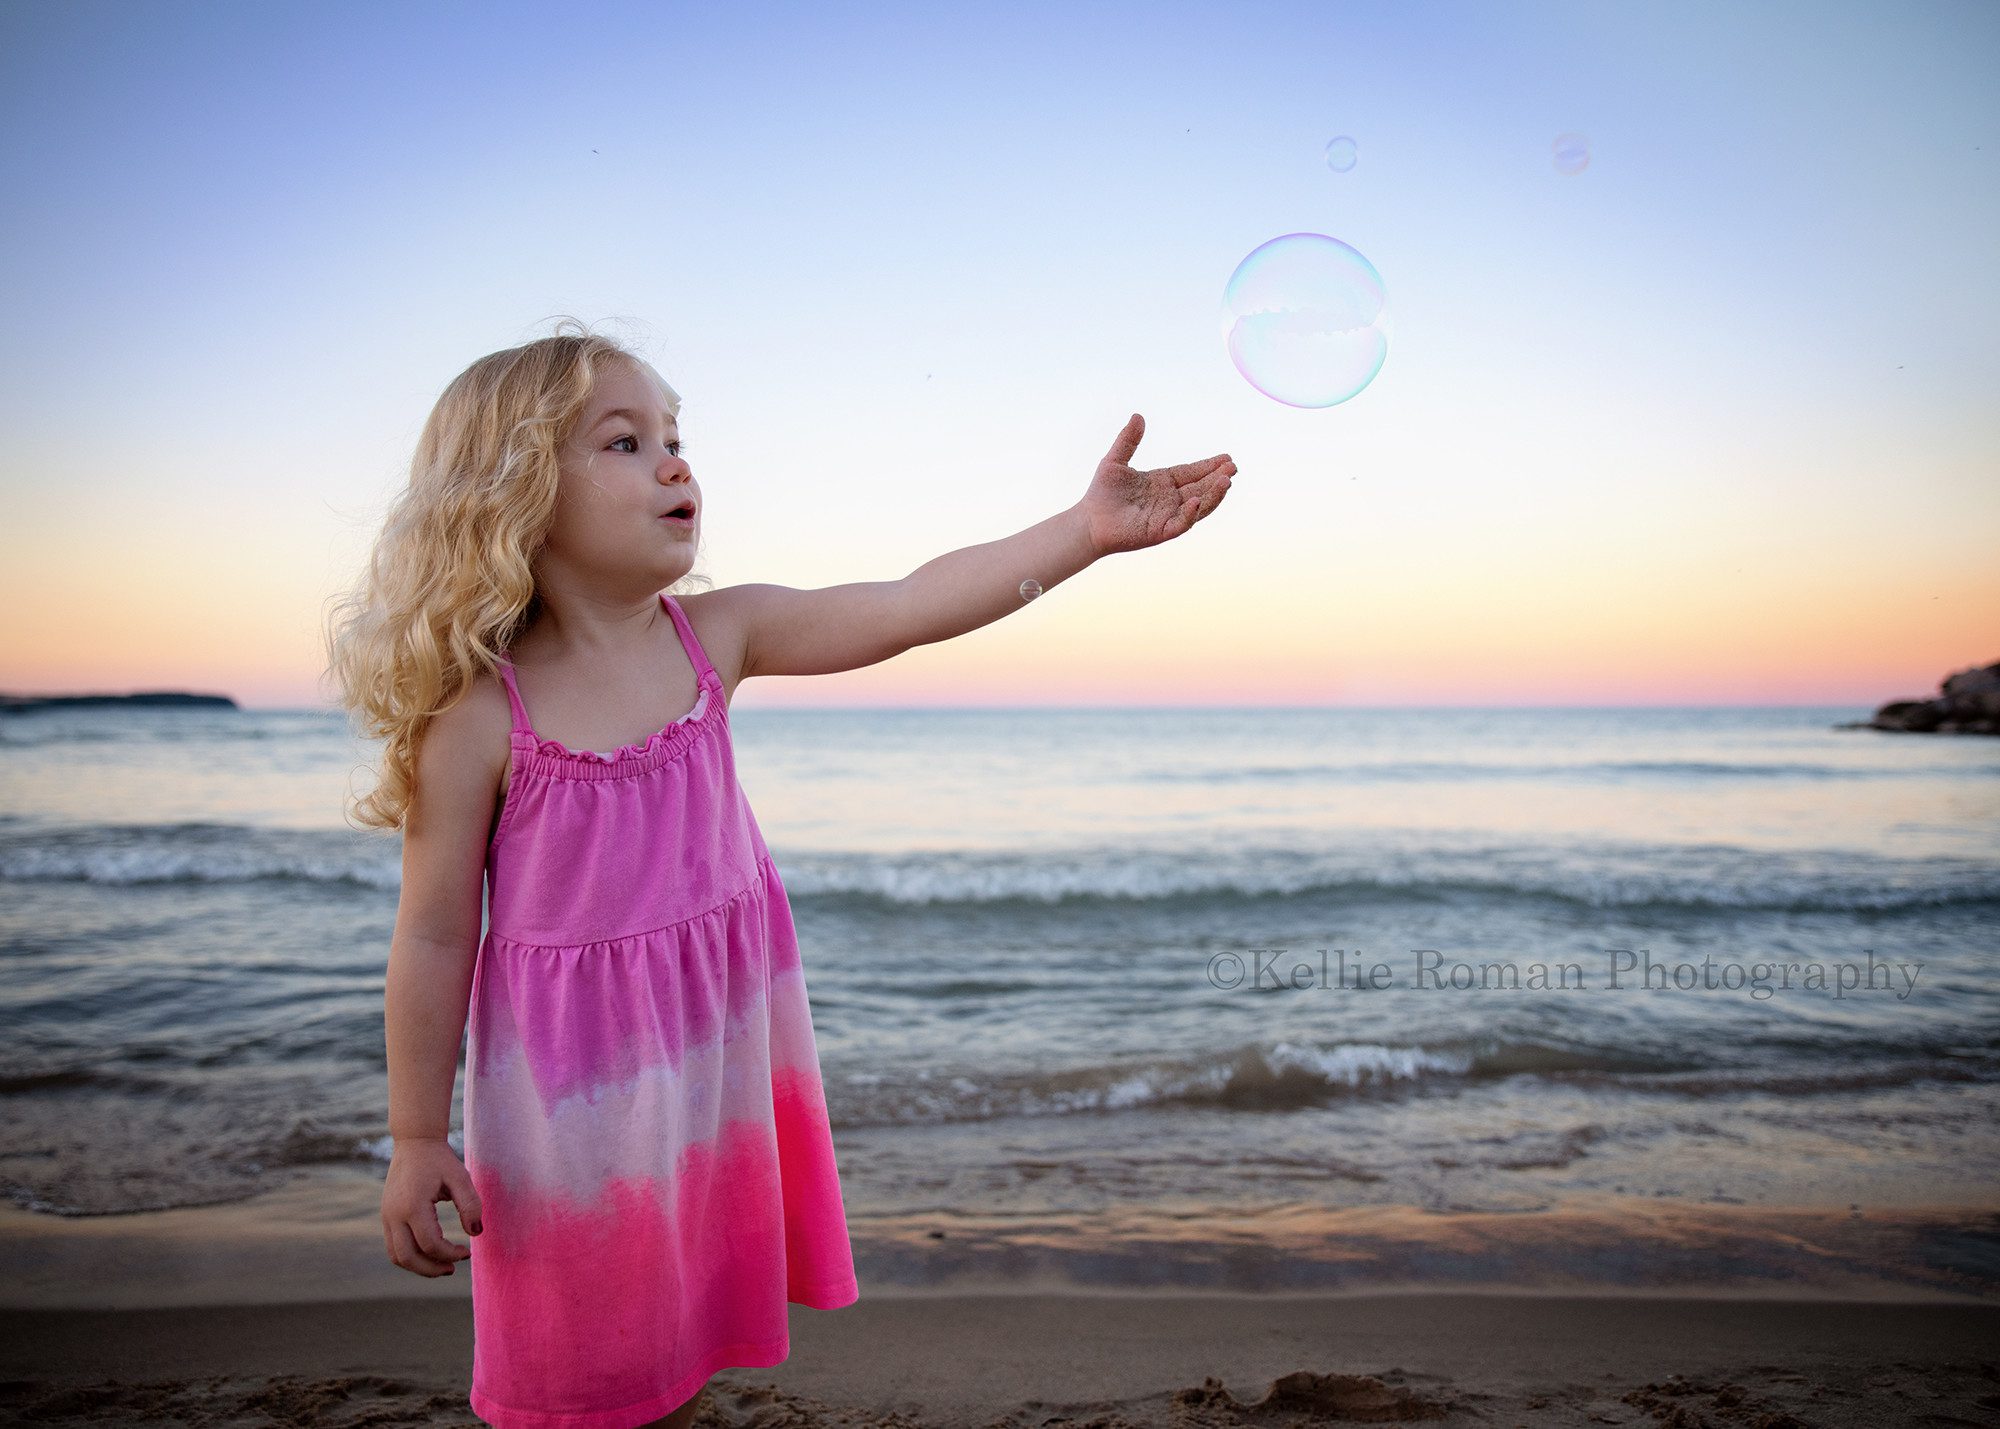 bubbles at the beach a three year old girl with blonde curly hair is standing on the beach with her arm up in the air ready to catch a bubble she is wearing a pink dress and the sunset sky is very colorful behind her